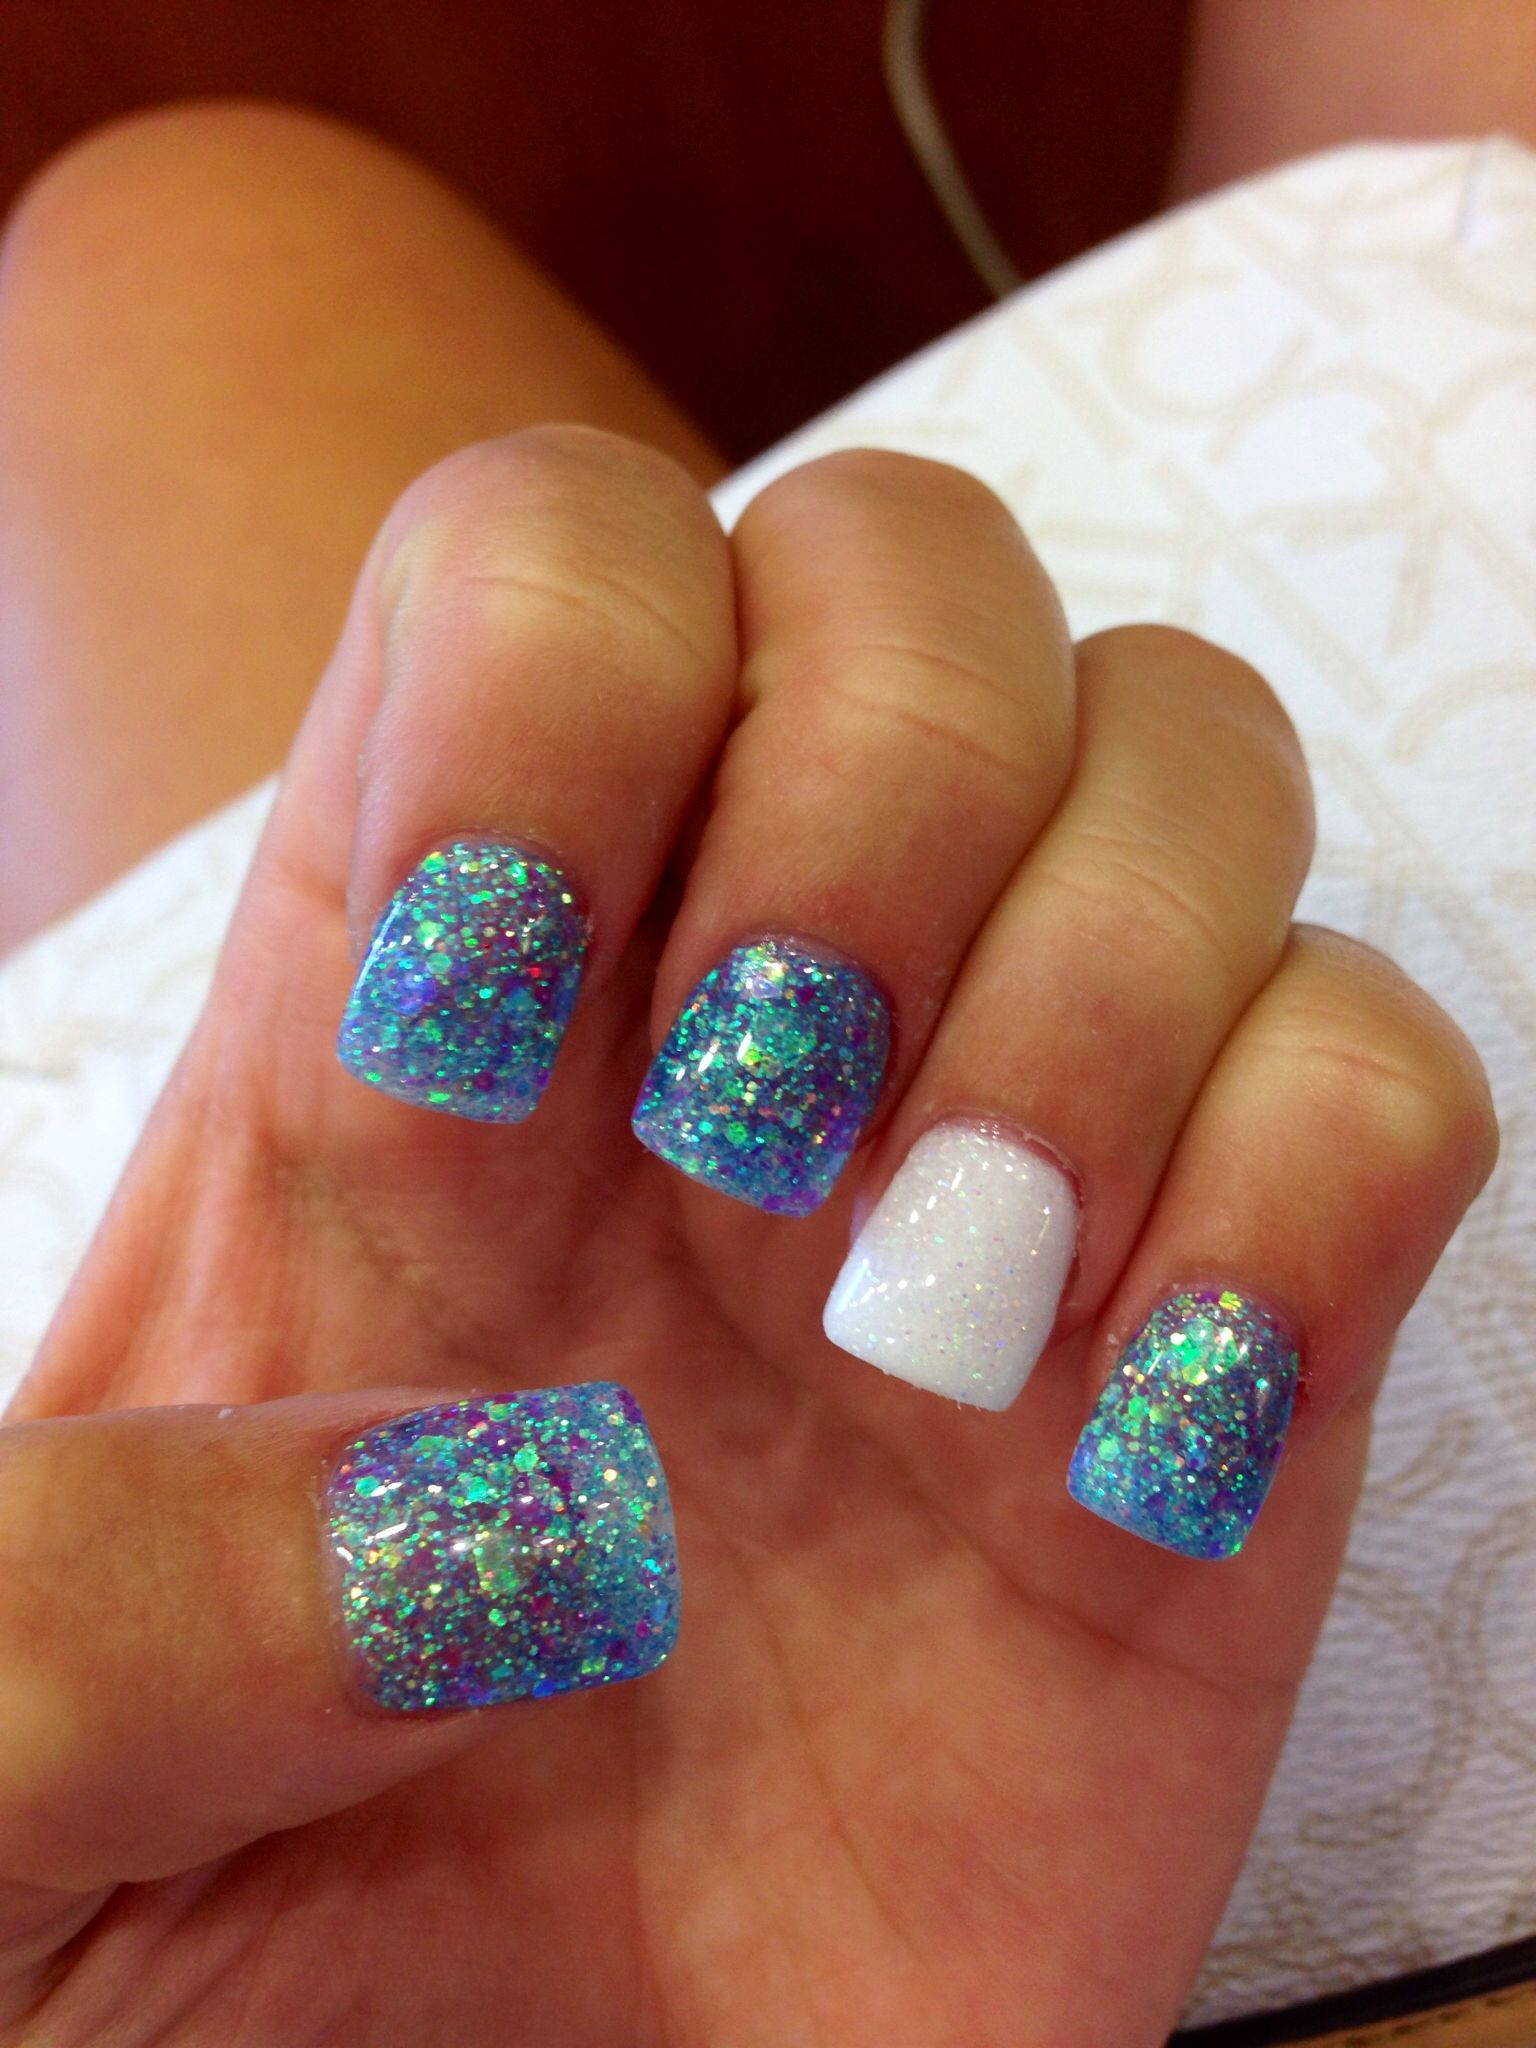 White Acrylic Nails With Glitter
 Opalescent blue nails white white glitter accent